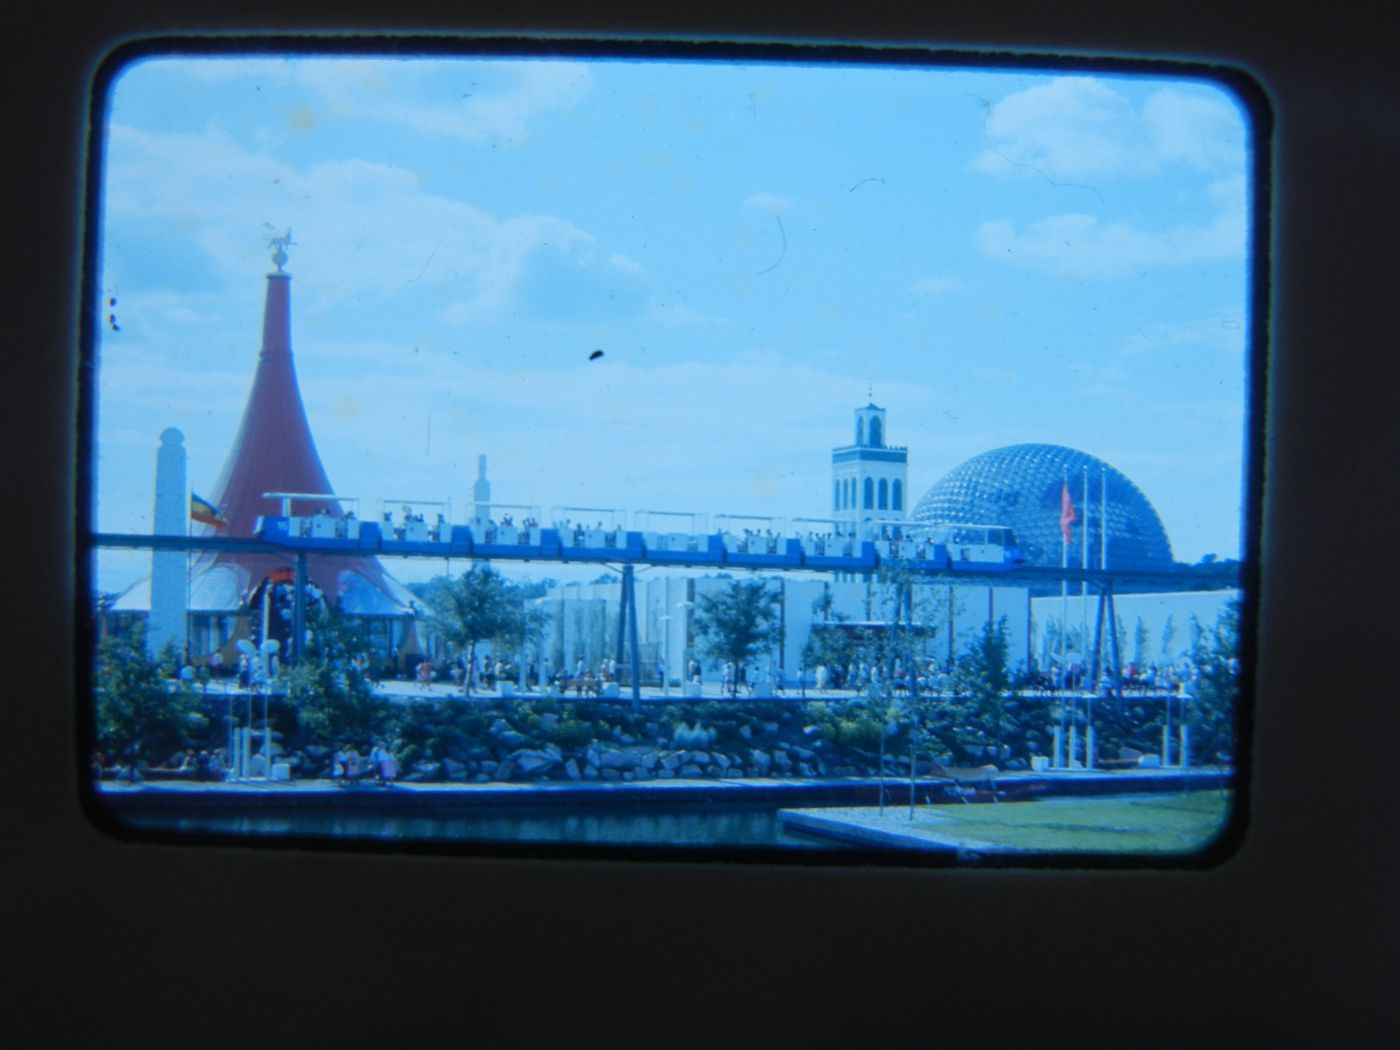 View of the Ethiopian and Tunisian Pavilions with a minirail in foreground, Expo 67, Montréal, Québec